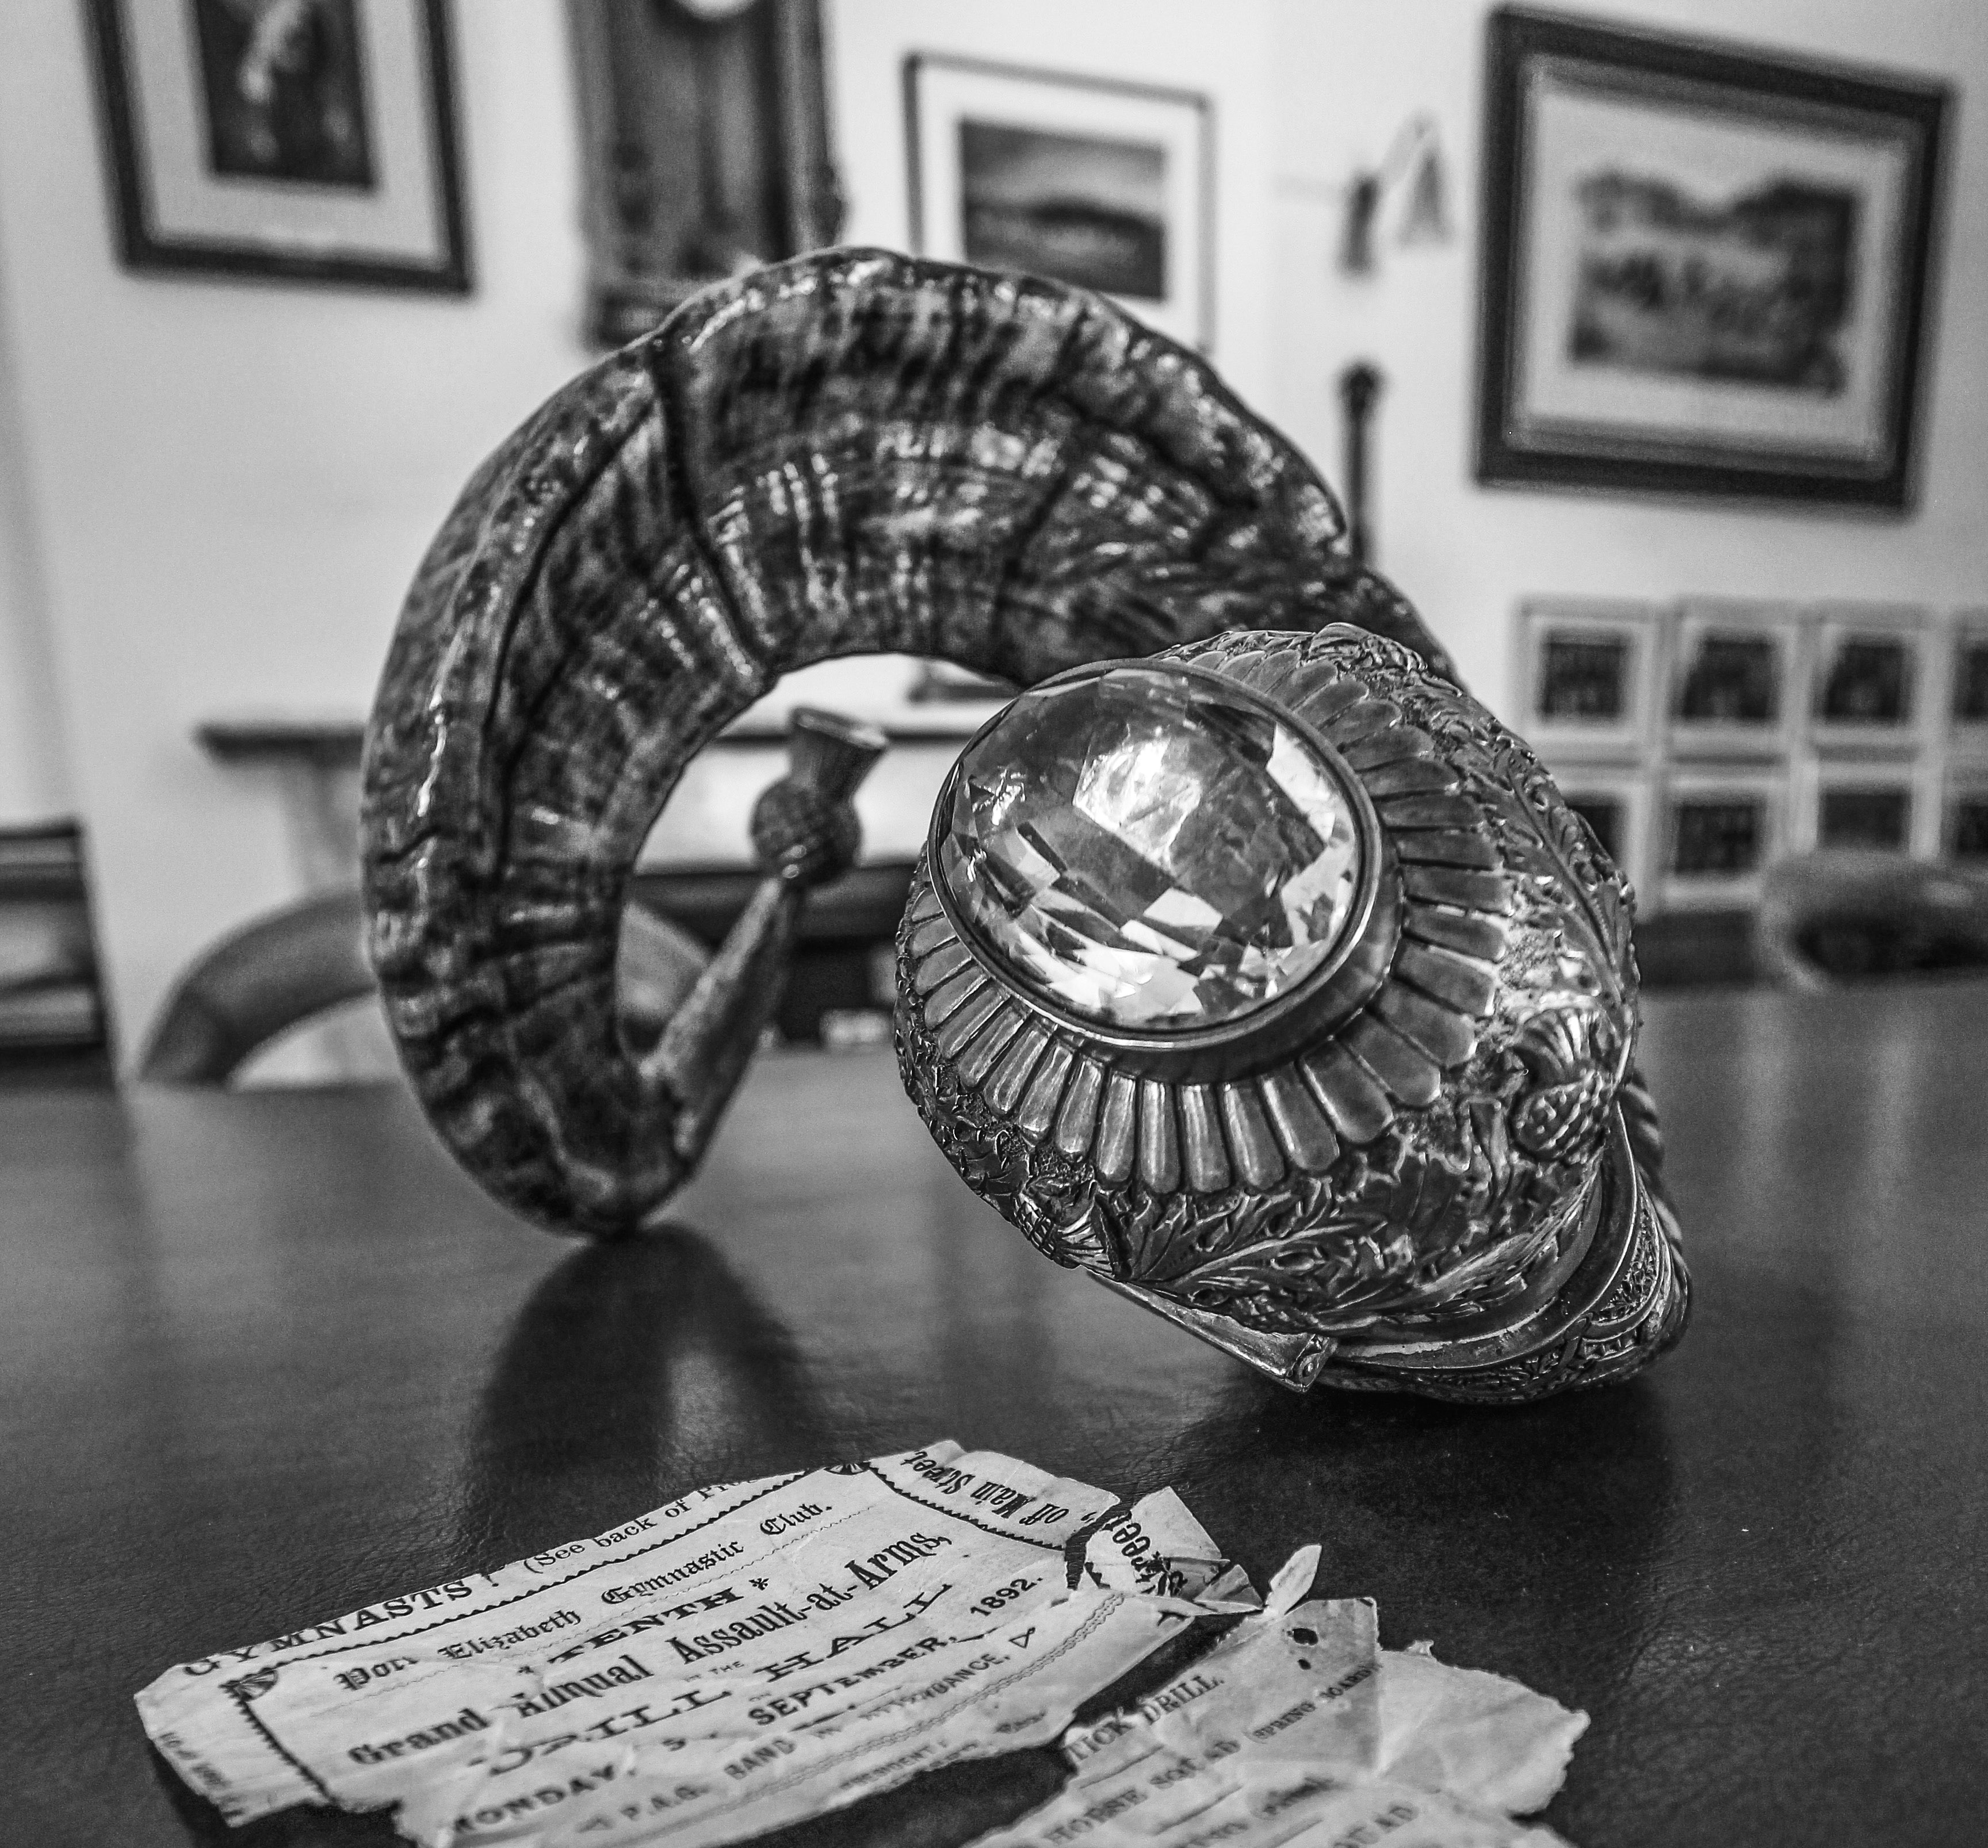 A snuff horn that once belonged to a Scottish Highland sheep - now a prized possession of the Cradock Club. Photograph by Chris Marais.